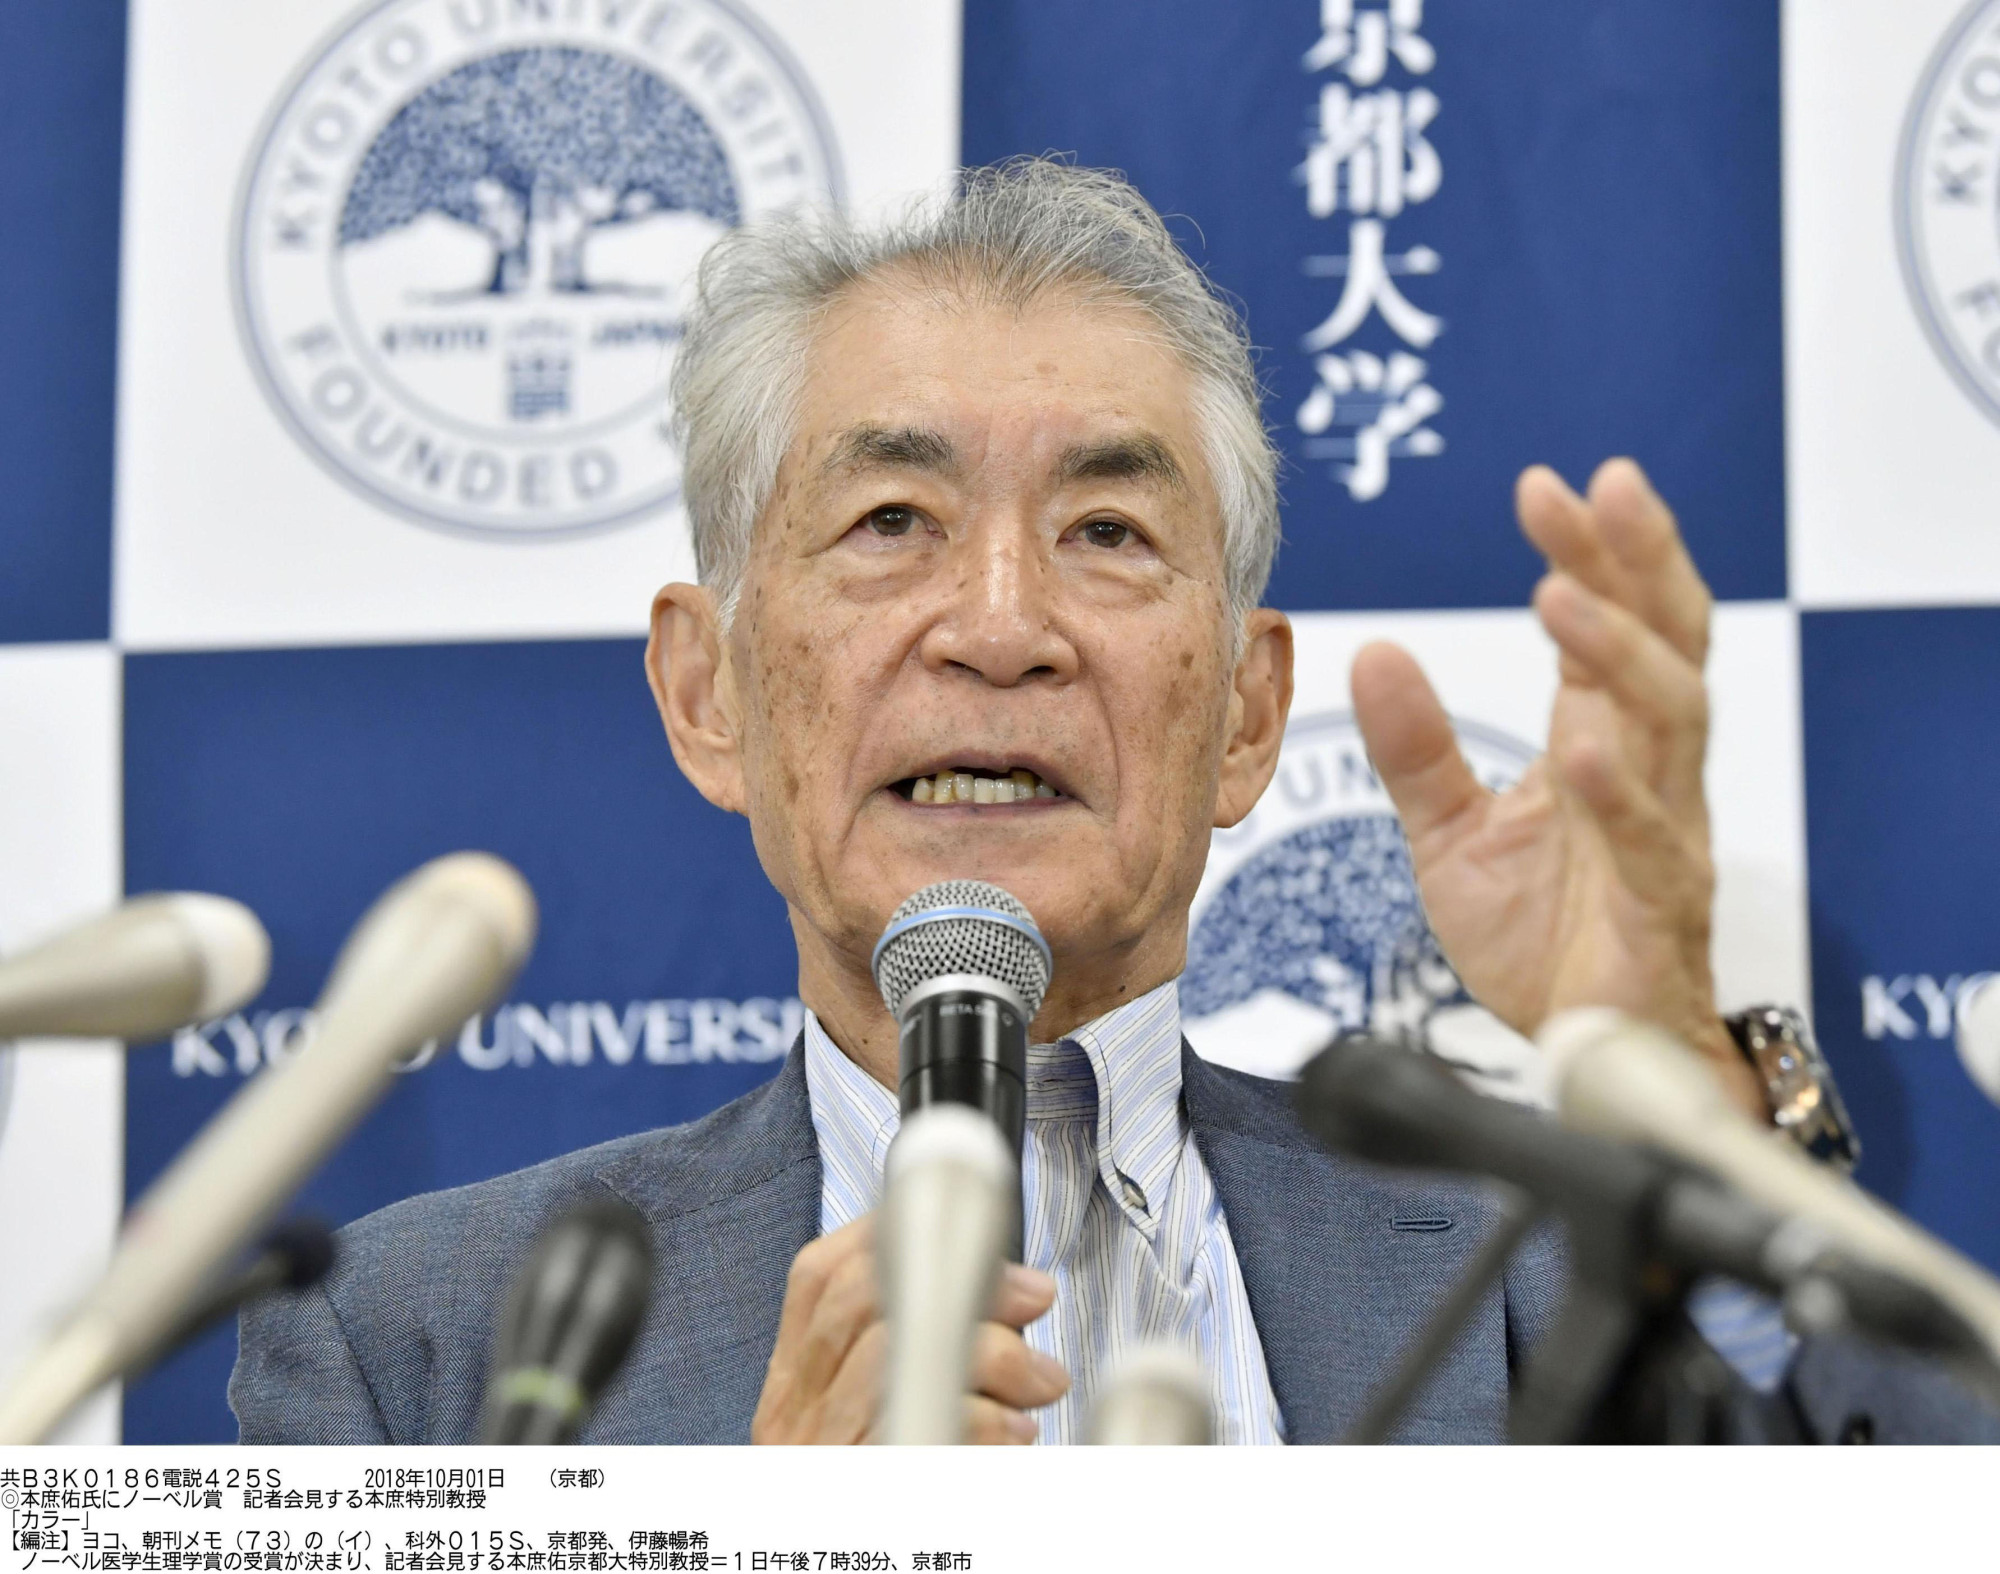 Tasuku Honjo, a professor at Kyoto University, speaks during a news conference on Monday in Kyoto, after the Nobel Prize award was announced. | KYODO